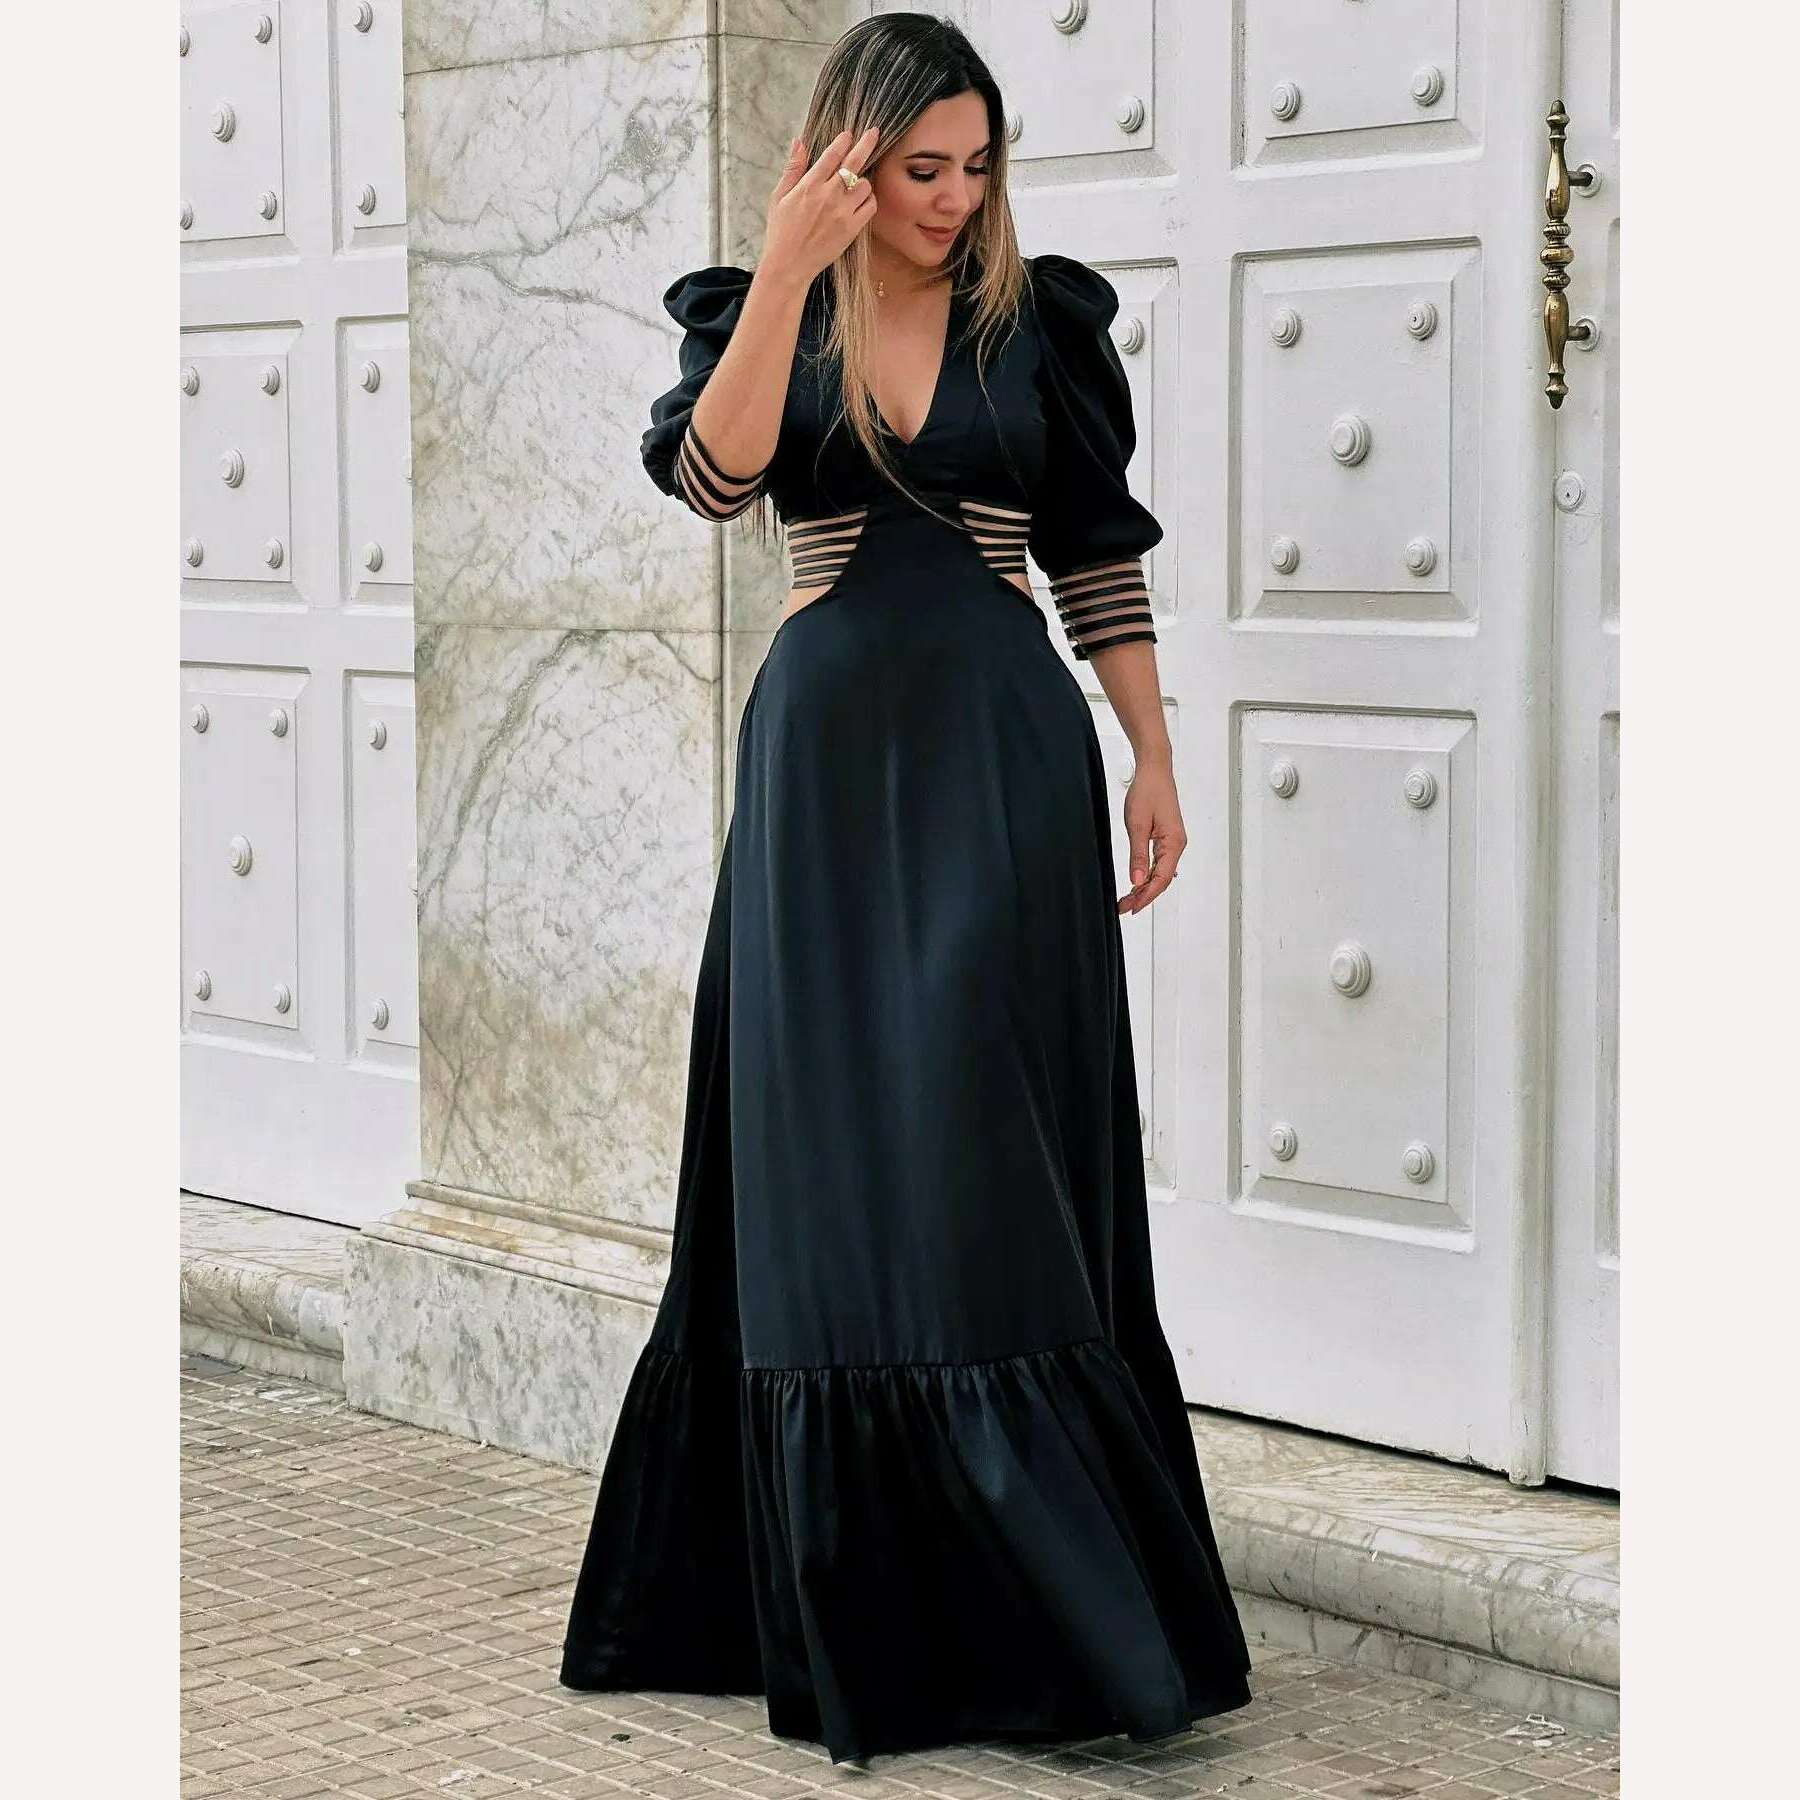 KIMLUD, 2023 Summer New Fashion Women Dresses Elegant Party Female Evening Dress Sexy Women's Clothing Chic Robes, PI24080D1 / S, KIMLUD Women's Clothes